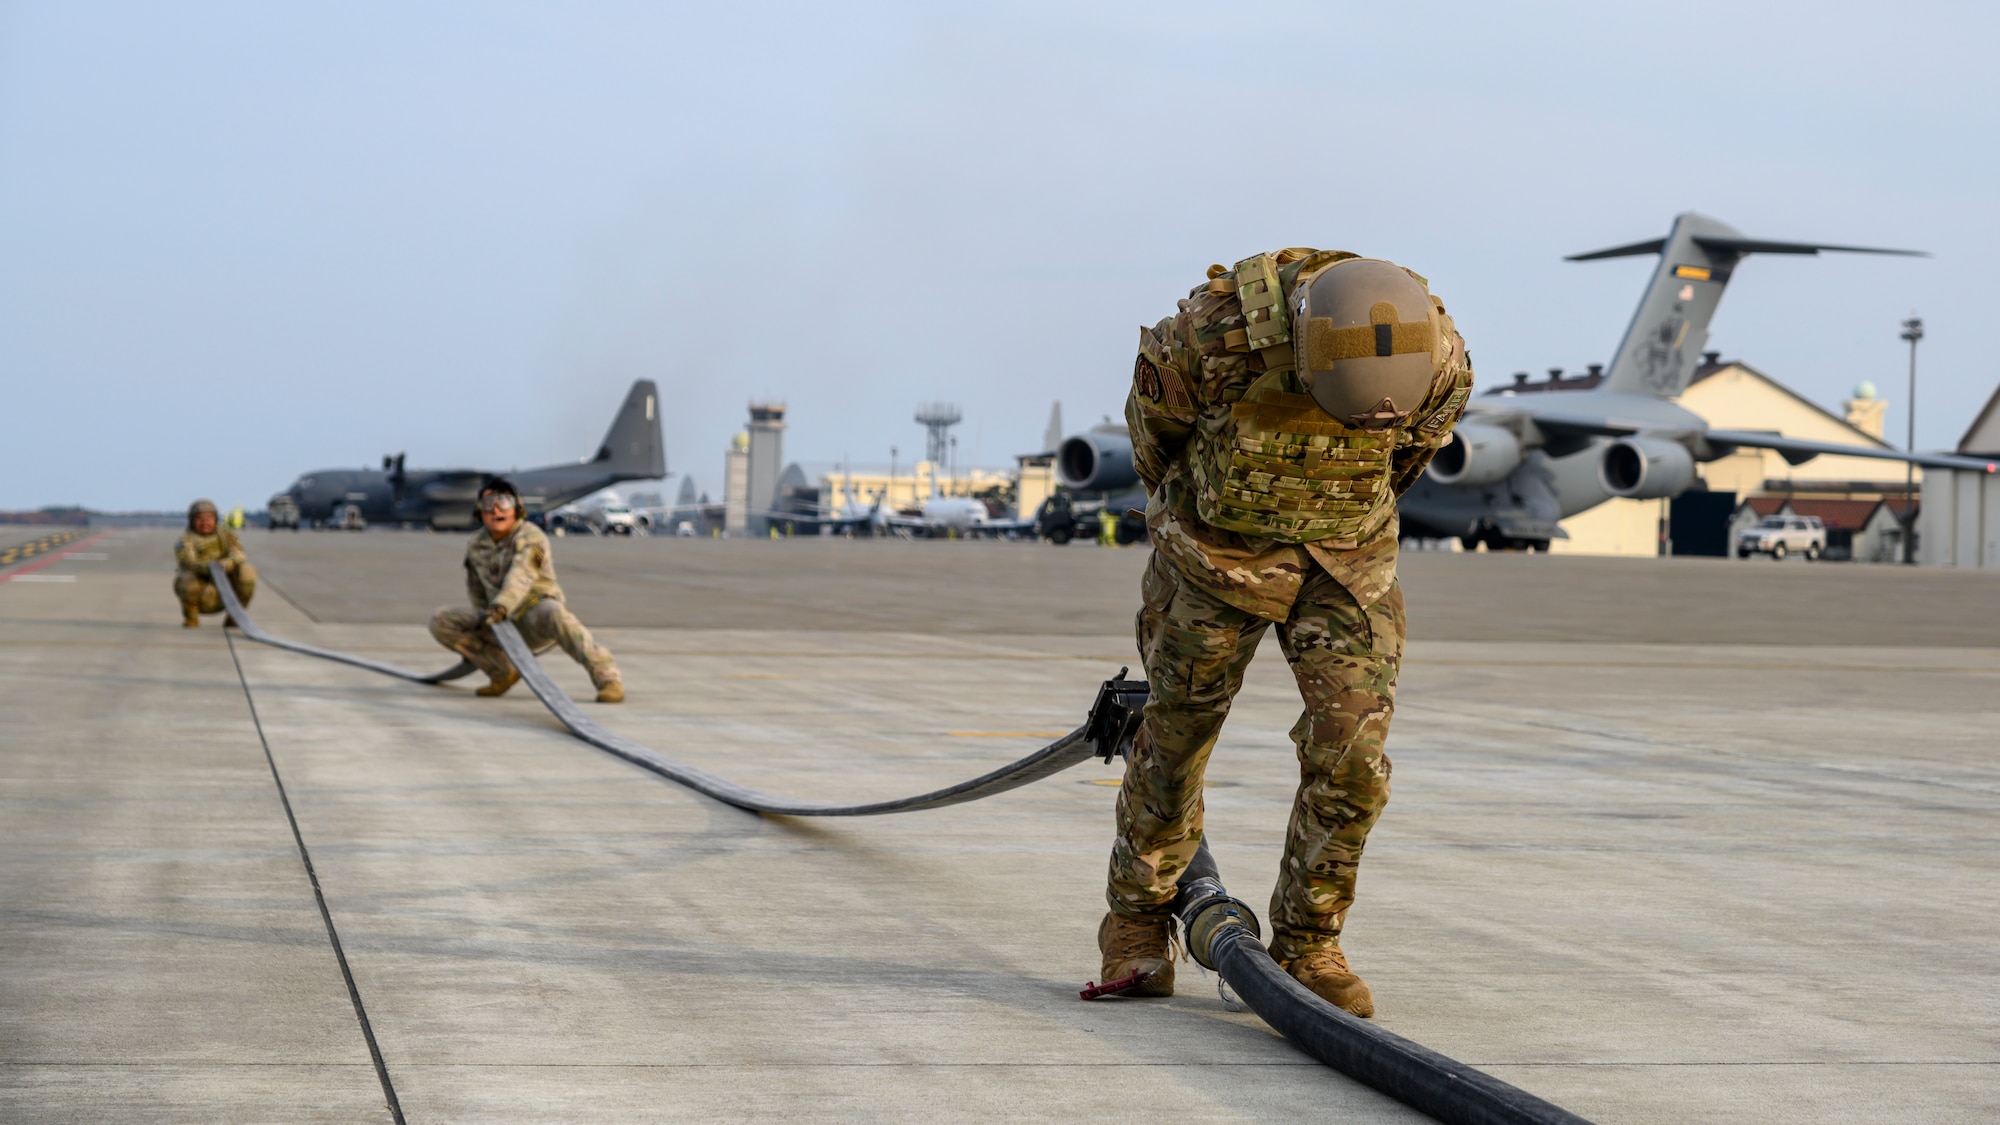 A U.S. Airman with the 1st Special Operations Squadron from Kadena Air Base, Japan, drains the gas from a fuel hose during a forward area refueling point (FARP) training at Misawa Air Base, Japan, Nov. 18, 2020. FARP, a specialty within the petroleum, oils and lubrication career field, trains Airmen to effectively refuel aircraft in remote locations when air-to-air refueling is not possible or when fueling stations are not accessible. (U.S. Air Force photo by Airman 1st Class China M. Shock)